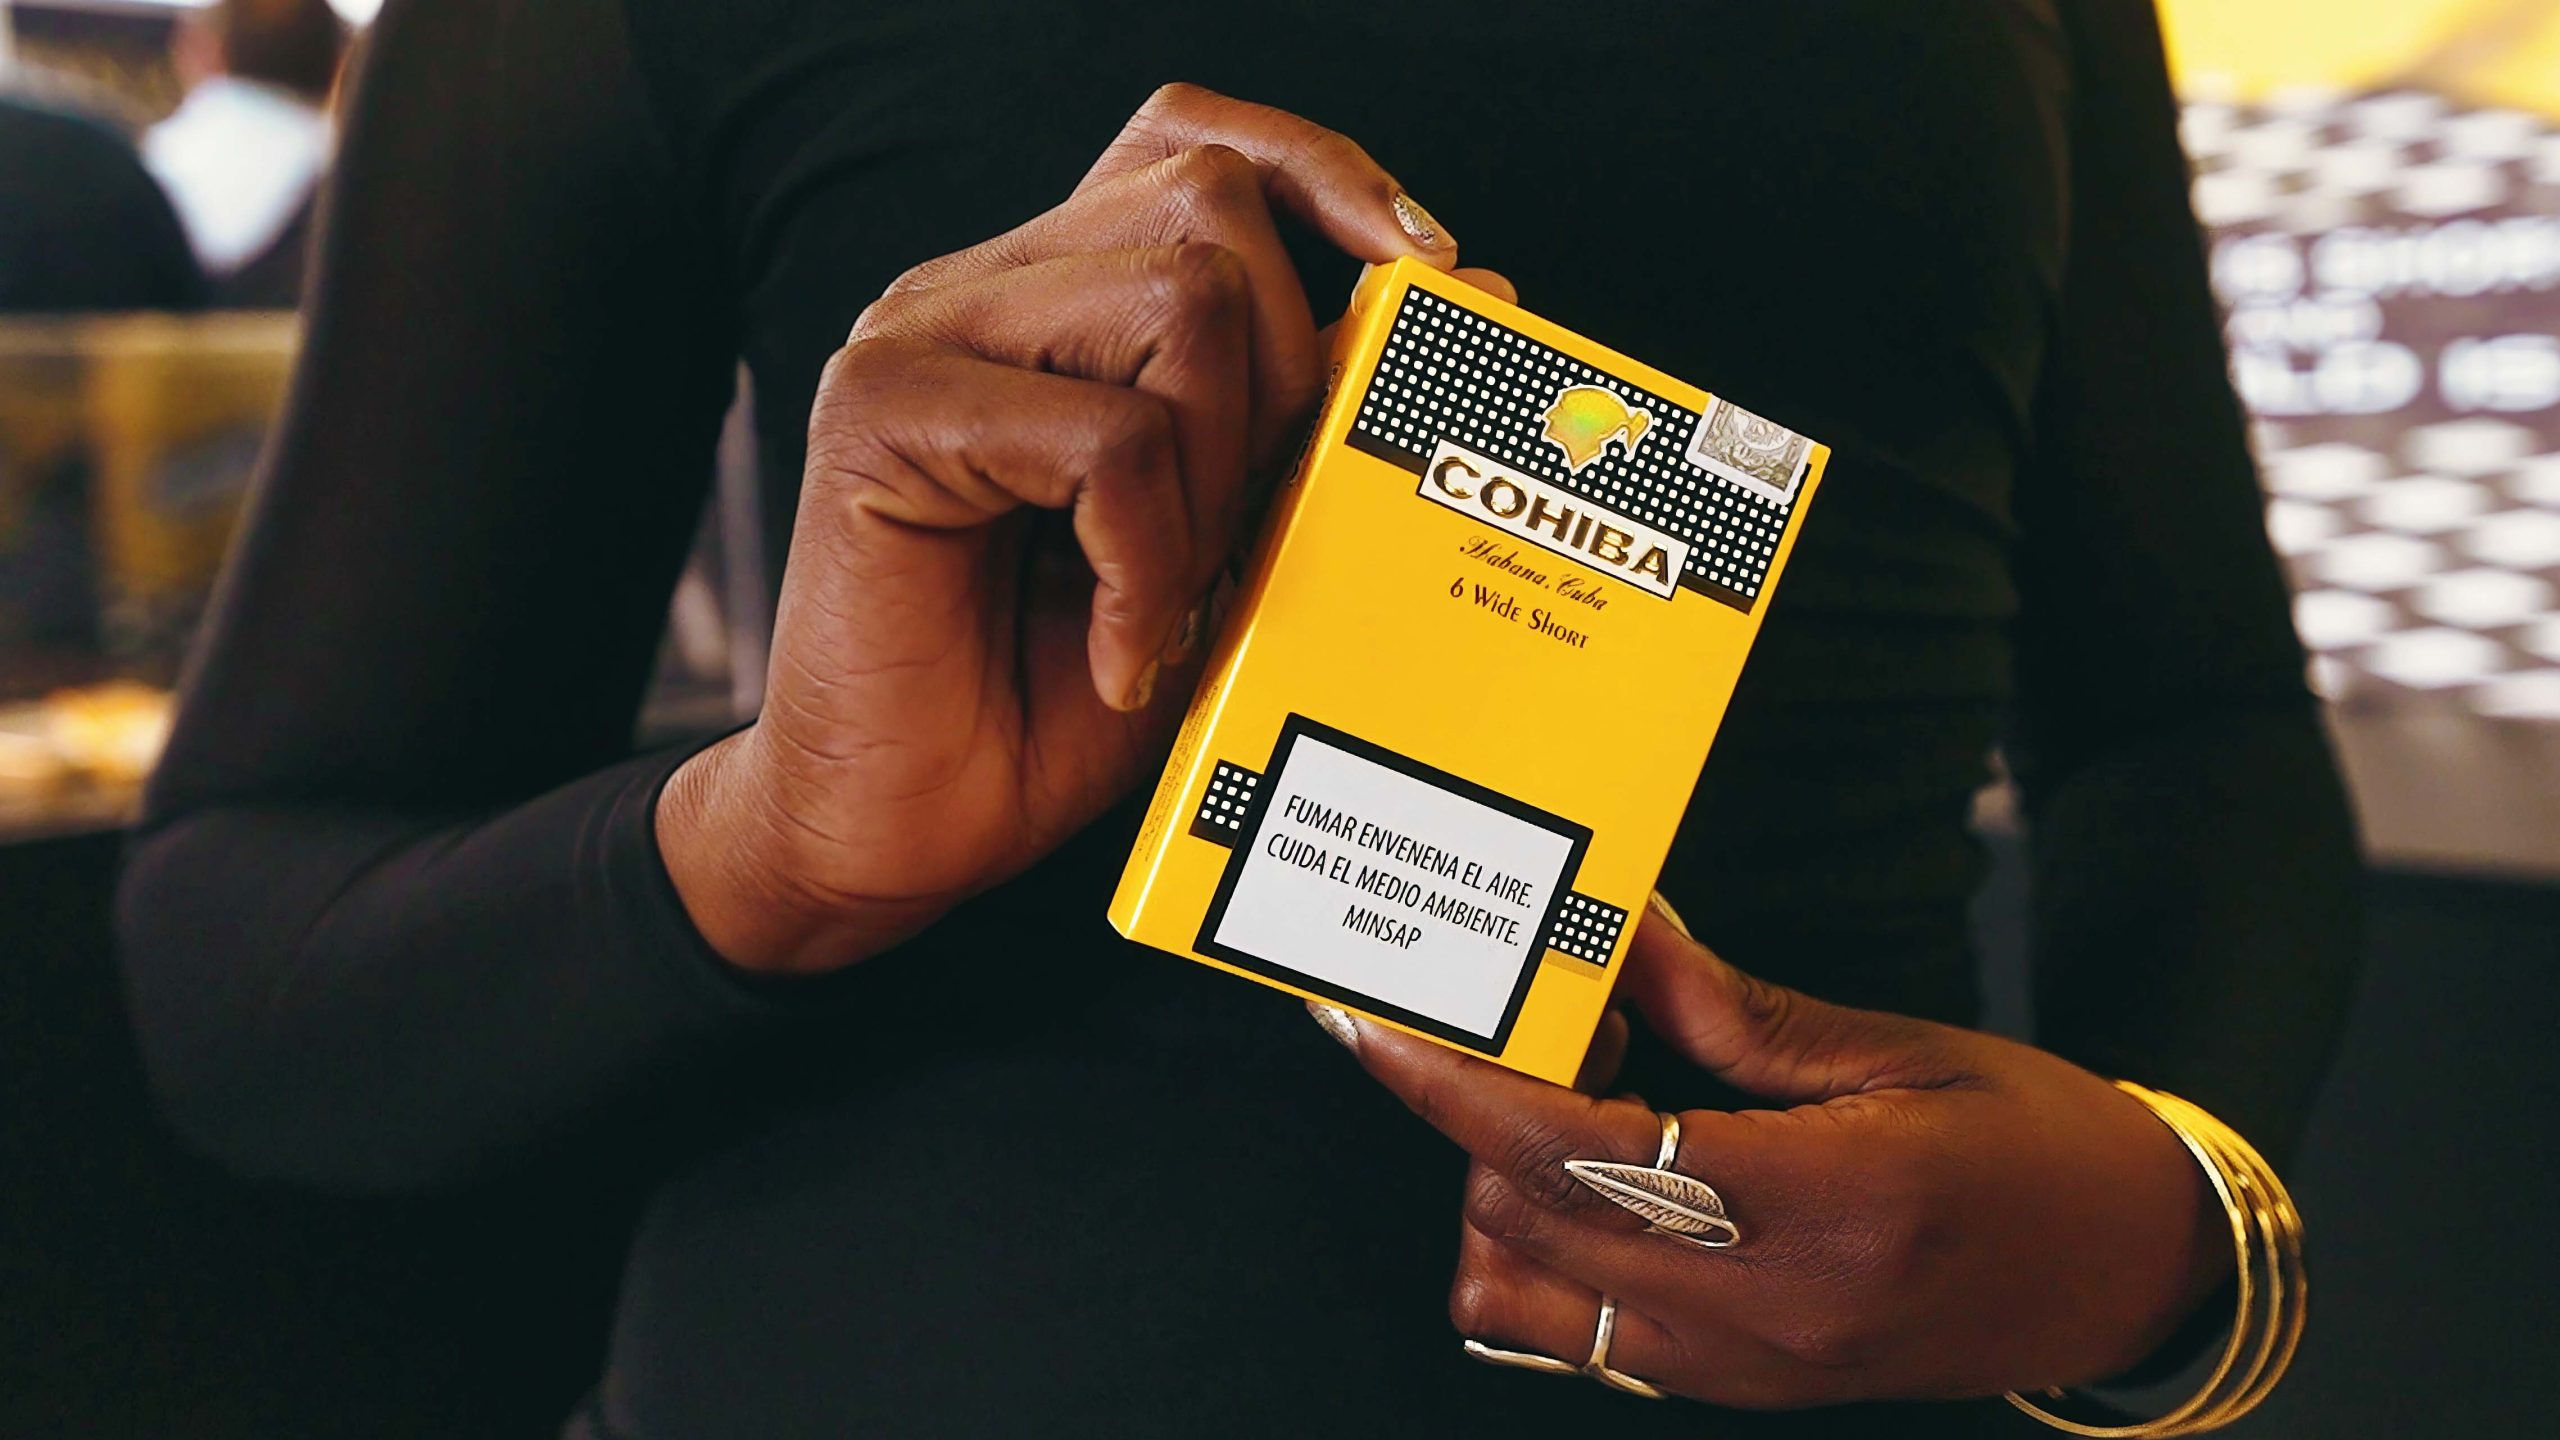 Hands-On Look at The New Cohiba Wide Short